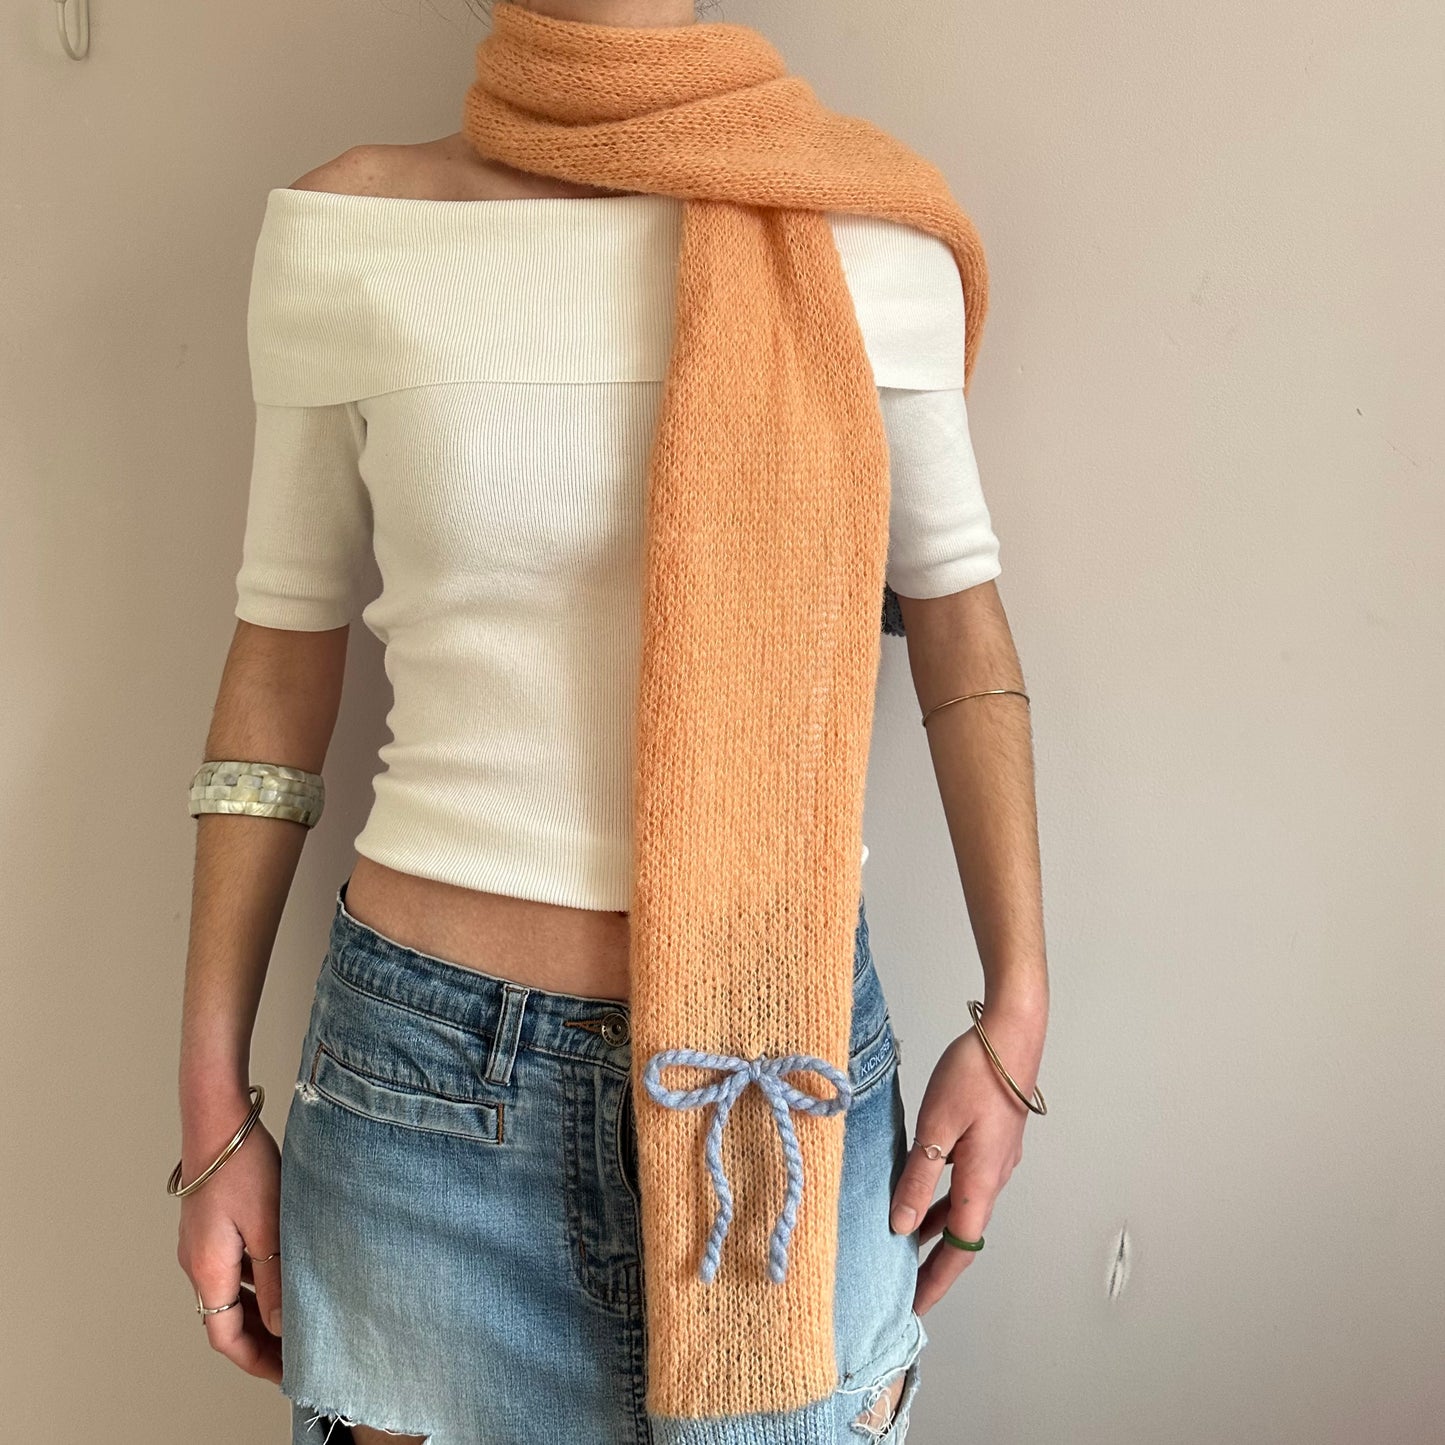 Handmade knitted orange and baby blue mohair bow scarf